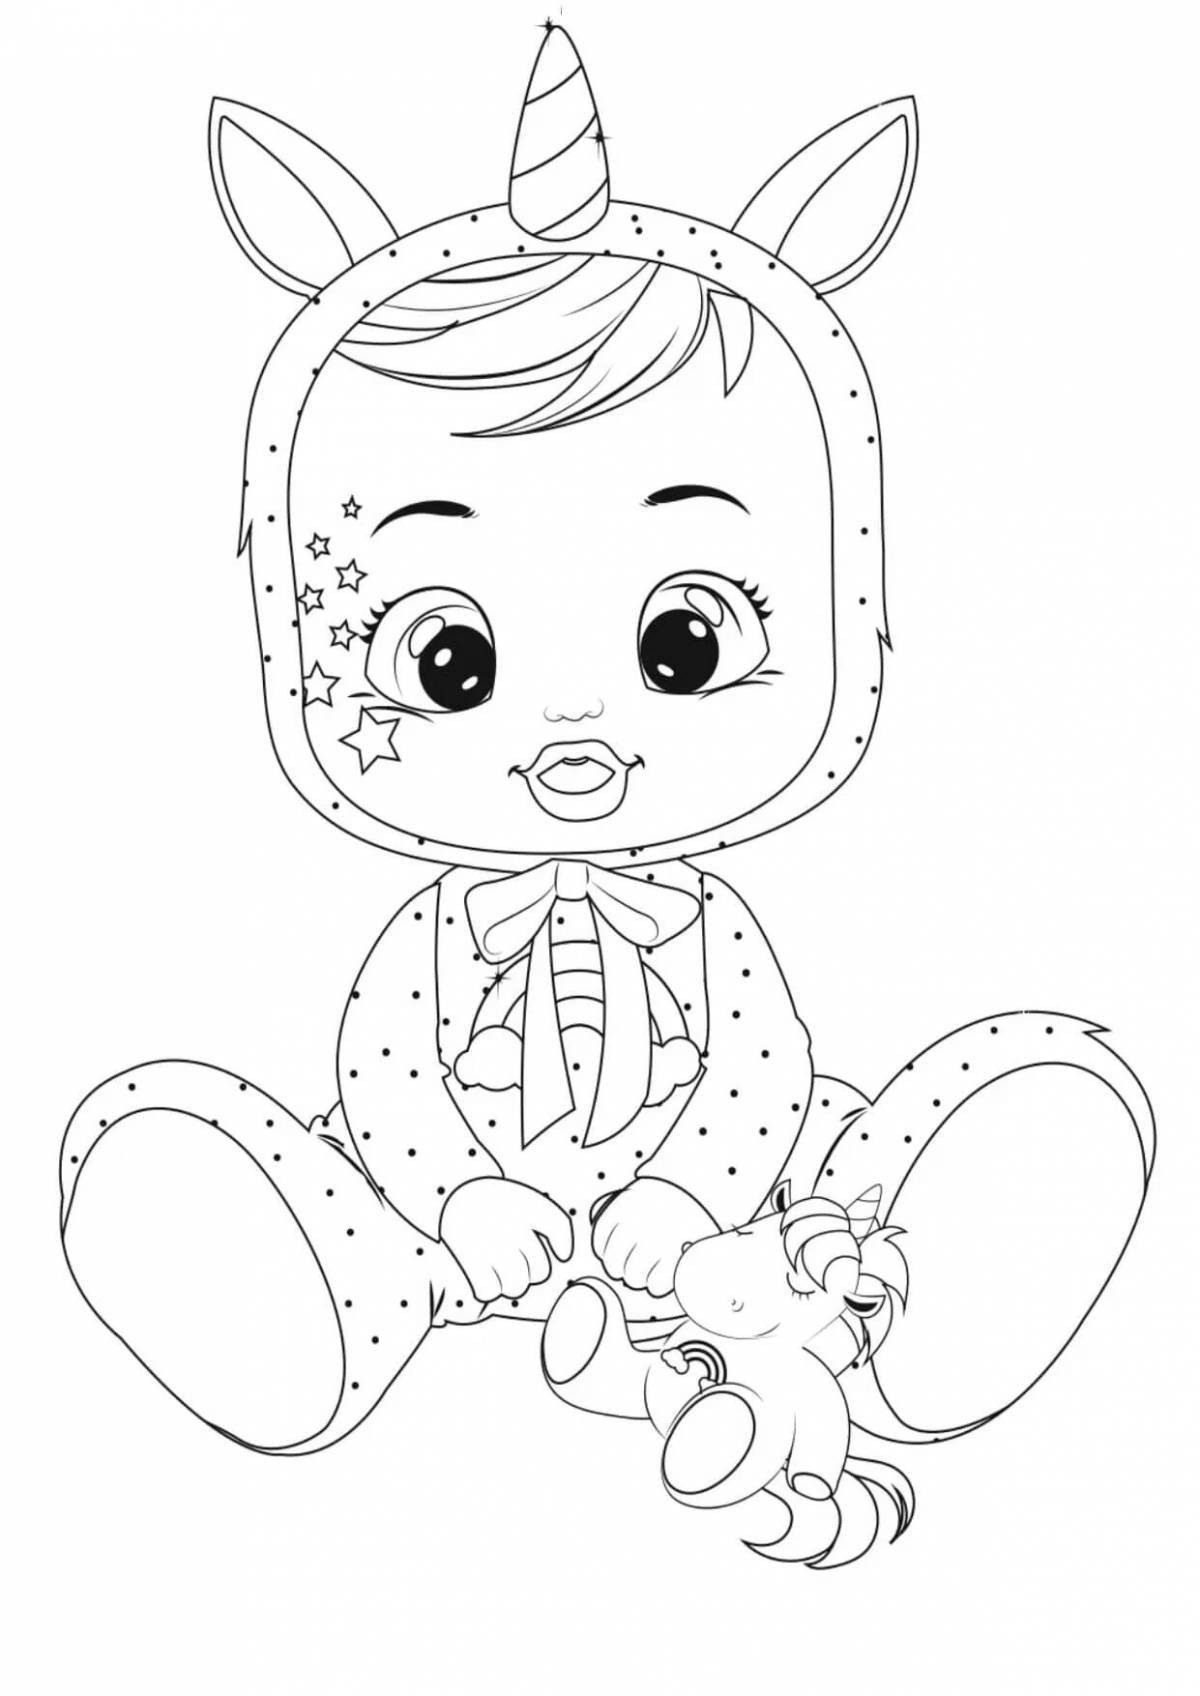 Colorful baby's edge coloring book for kids